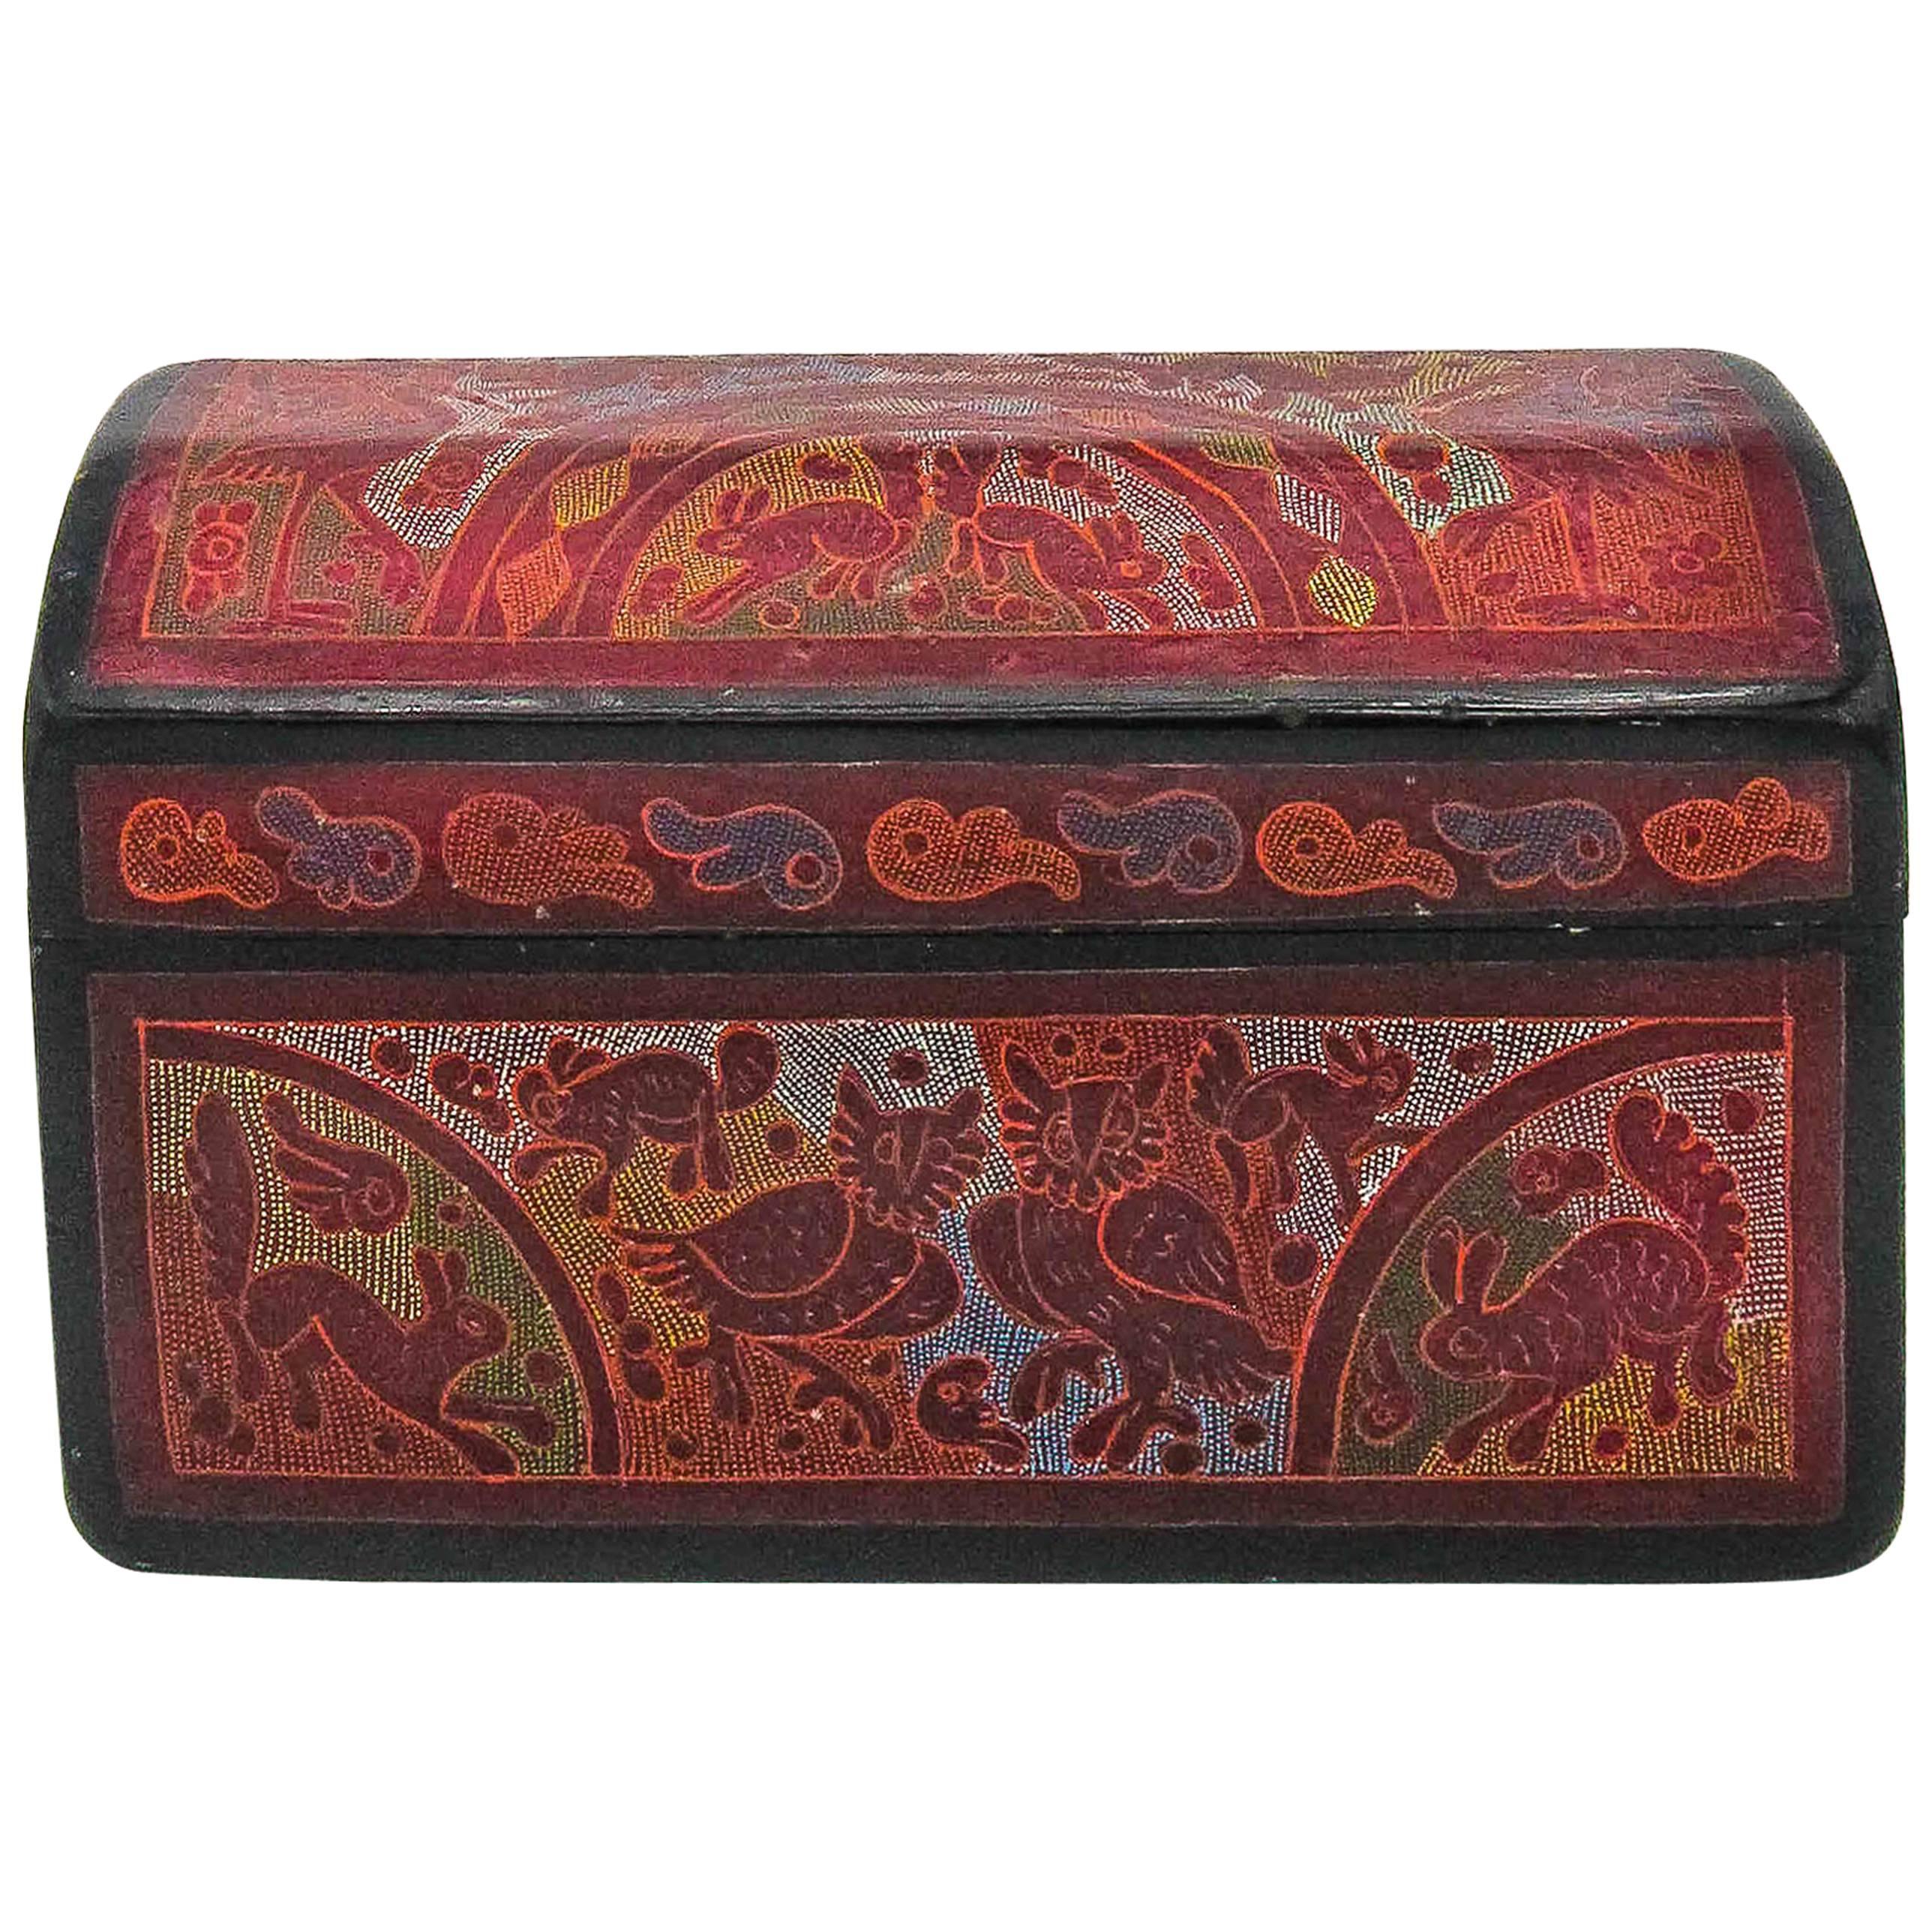 Traditional Wooden Hand-Painted Lacquer Box from Olinalá, Mexico